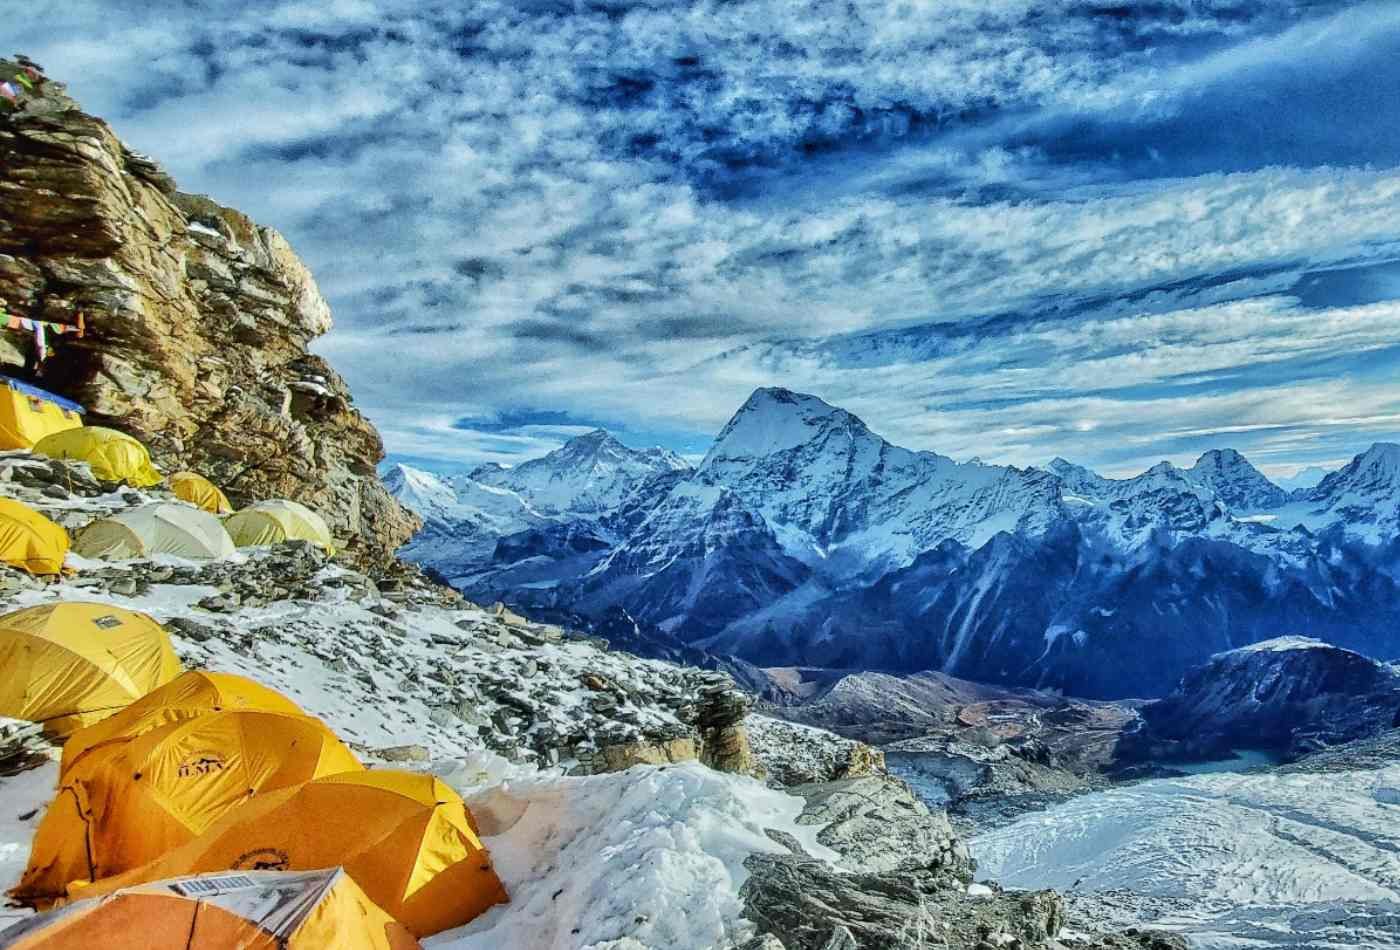 A campsite at Mera High camp with a tent set up on the snowy ground, surrounded by majestic mountains, with white clouds filling the blue sky.